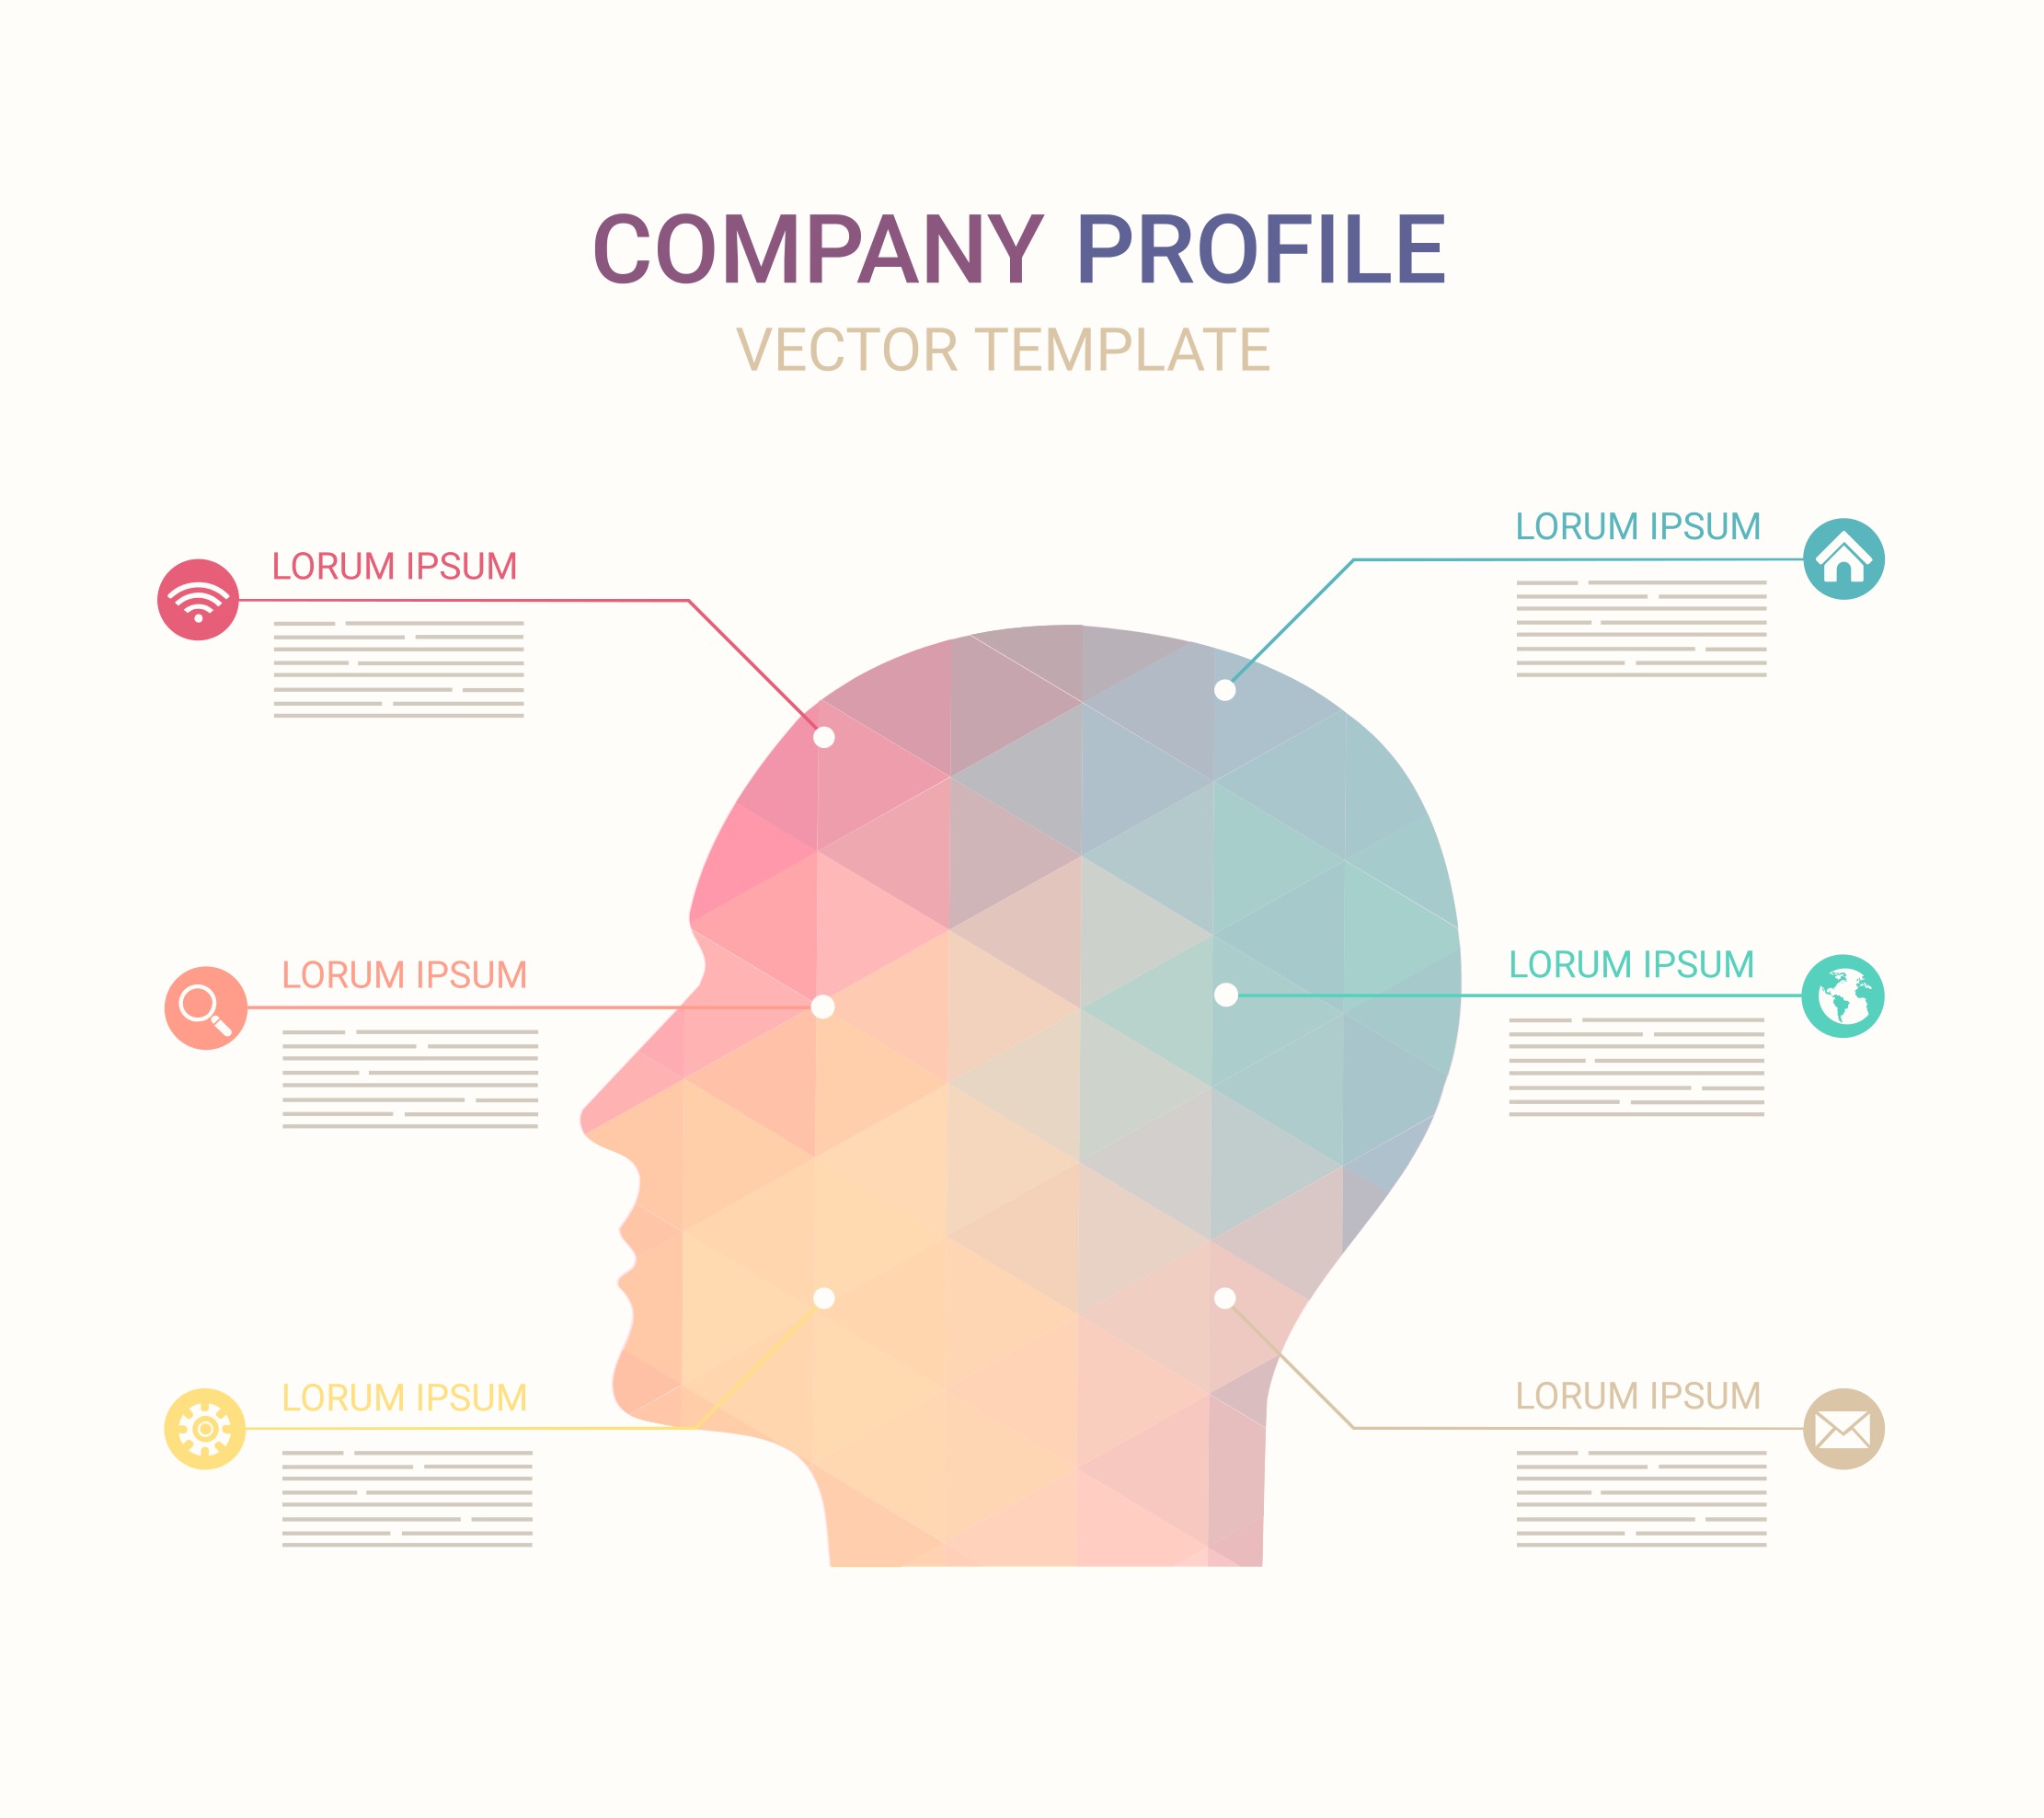 Free Vector Company Profile Template - Download Free 